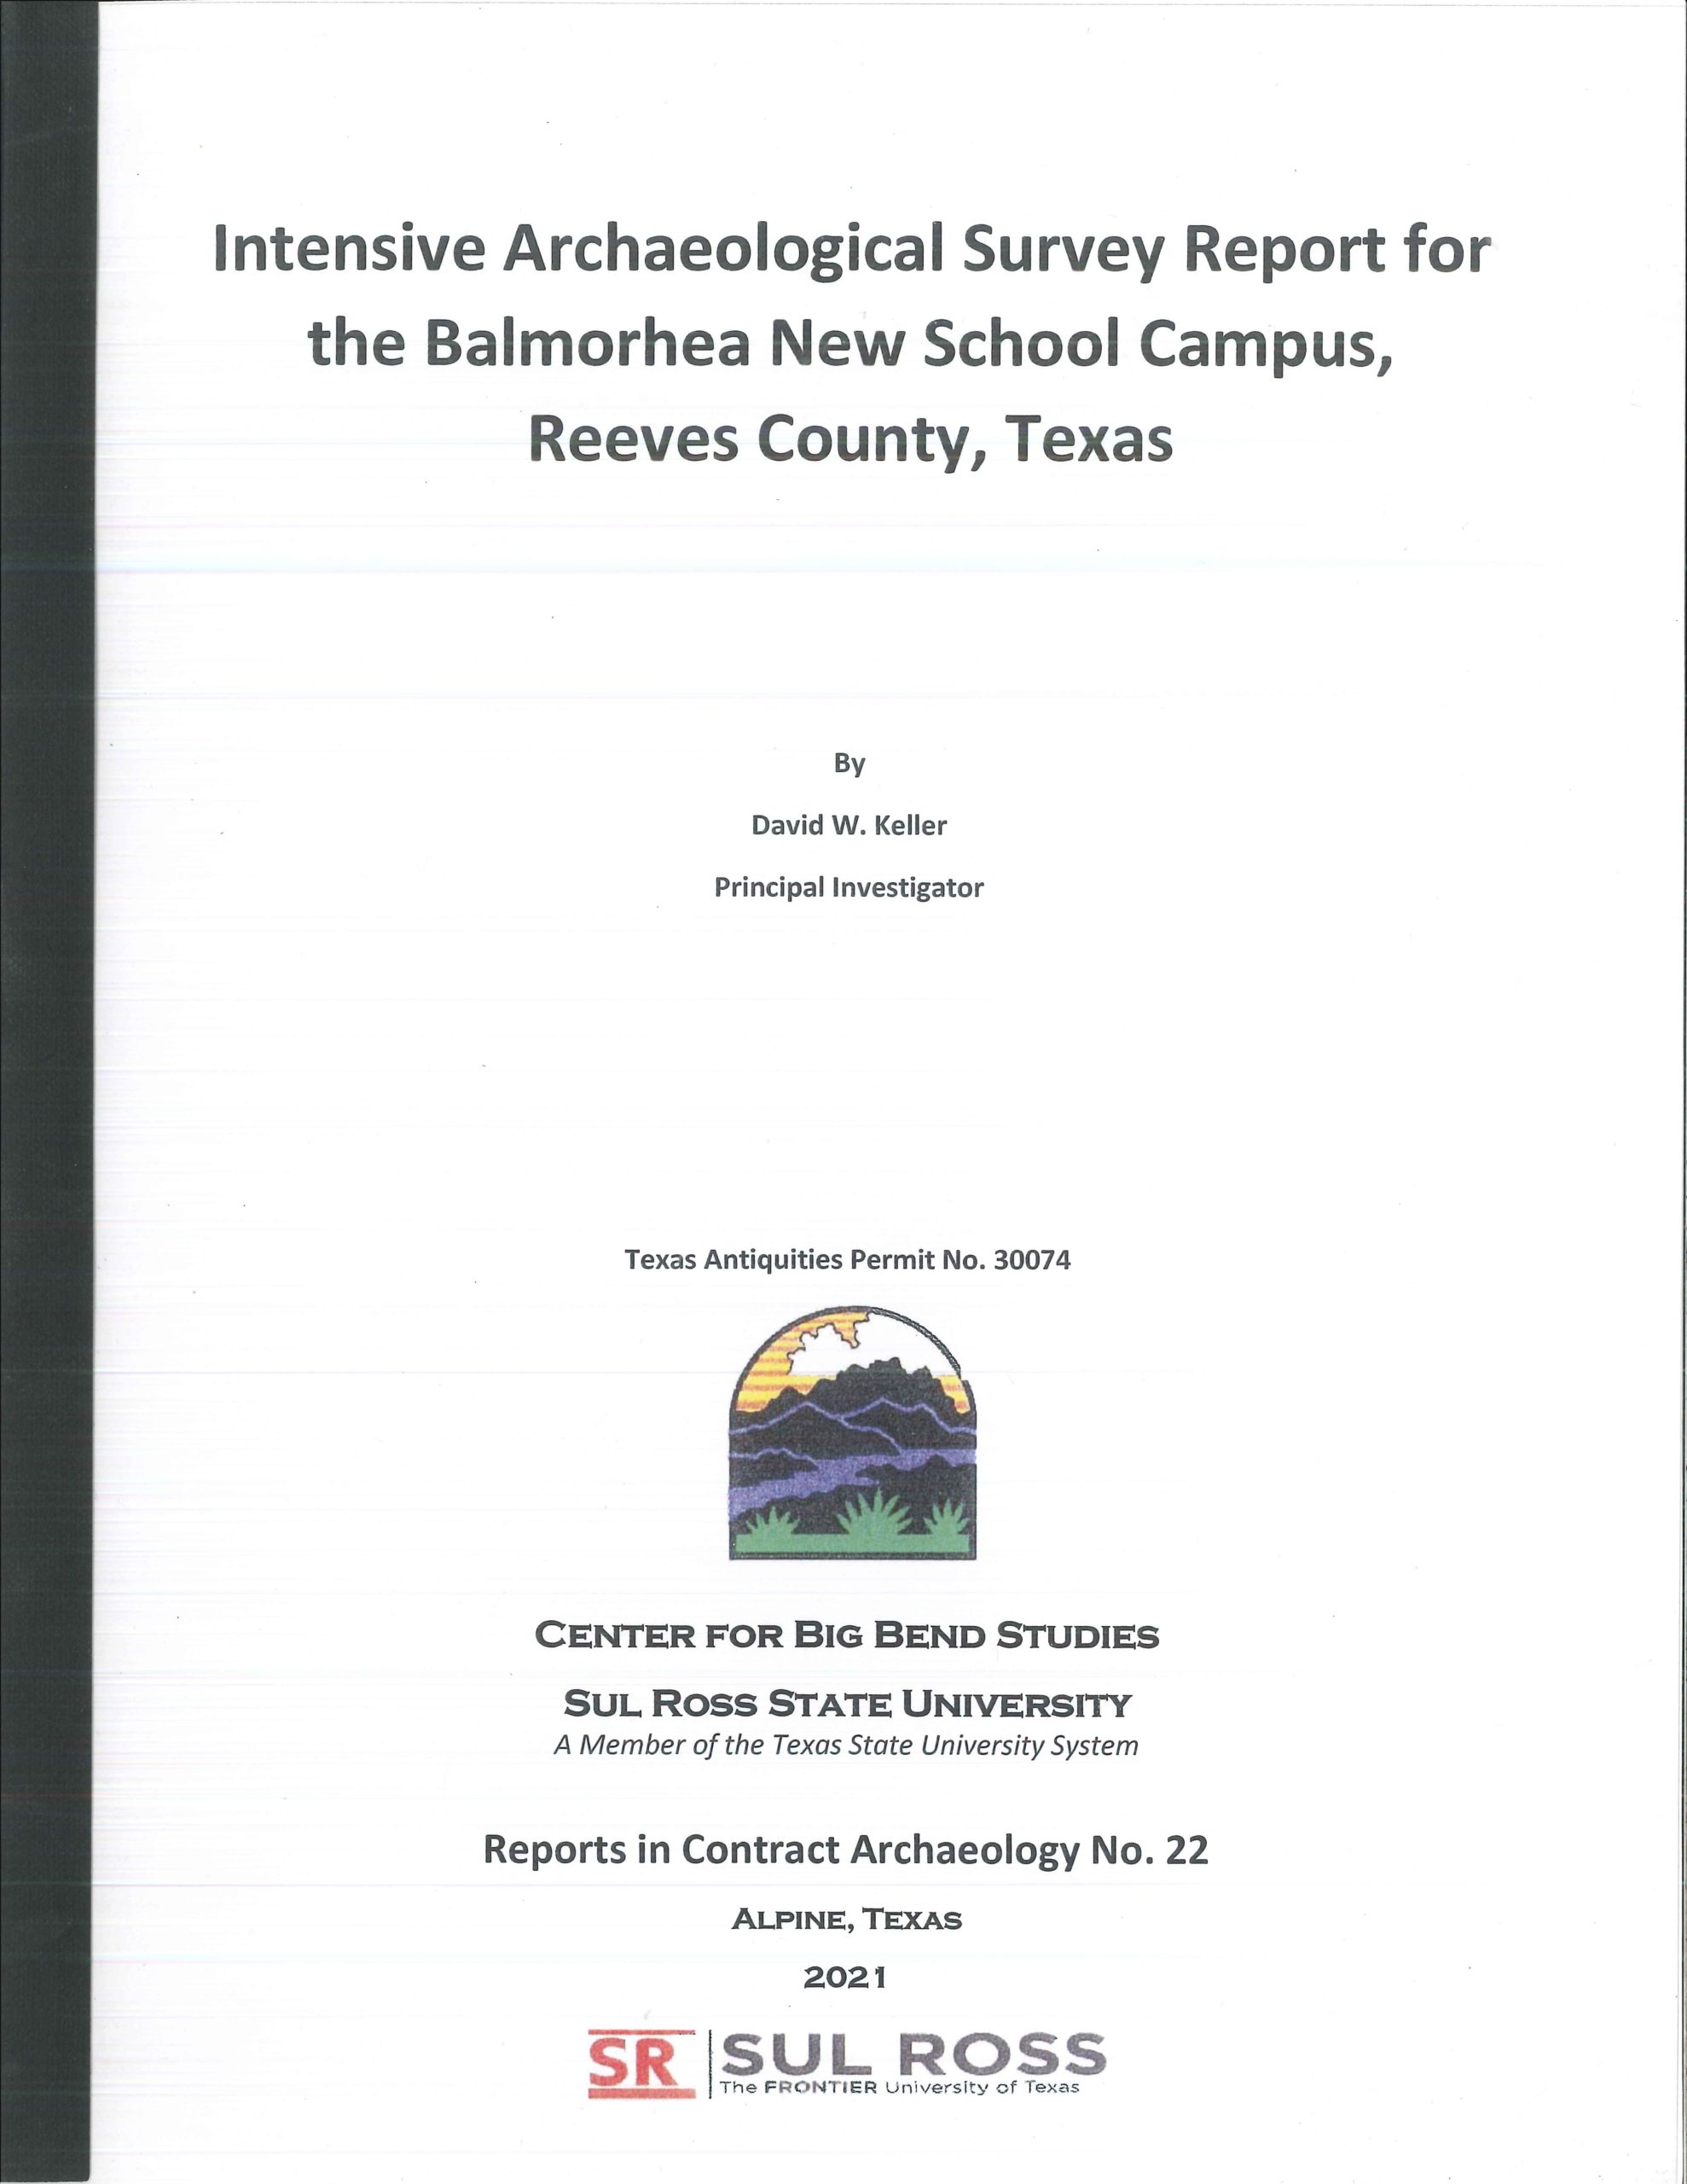 Intensive Archaeological Survey Report for the Balmorhea New School Campus, Reeves County, Texas